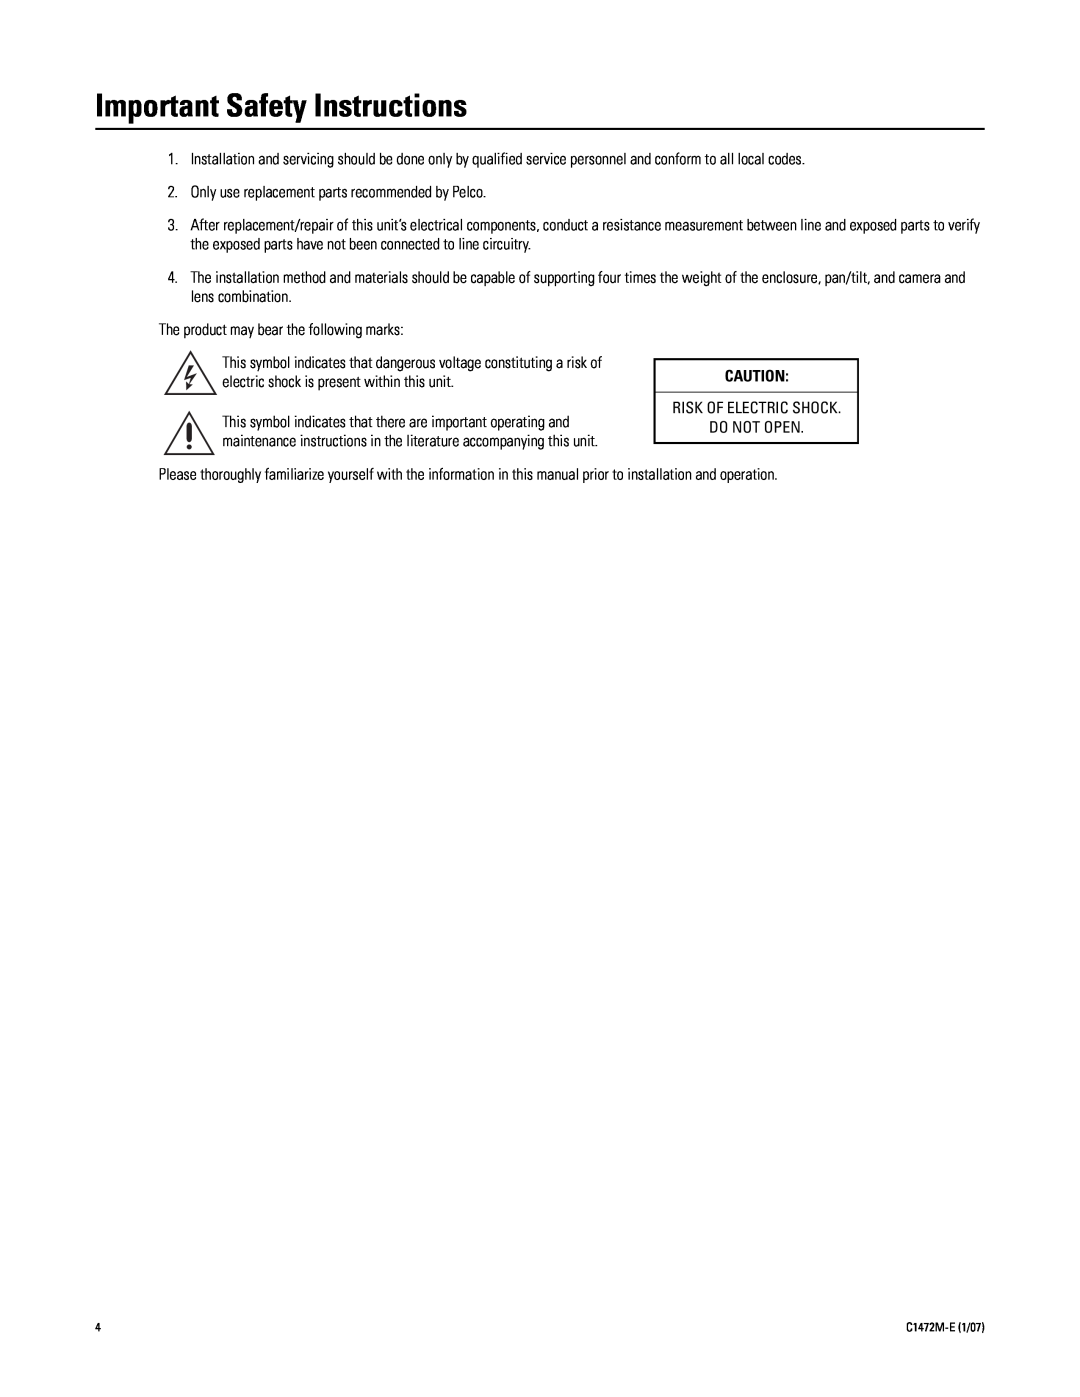 Pelco HS4514 manual Important Safety Instructions 